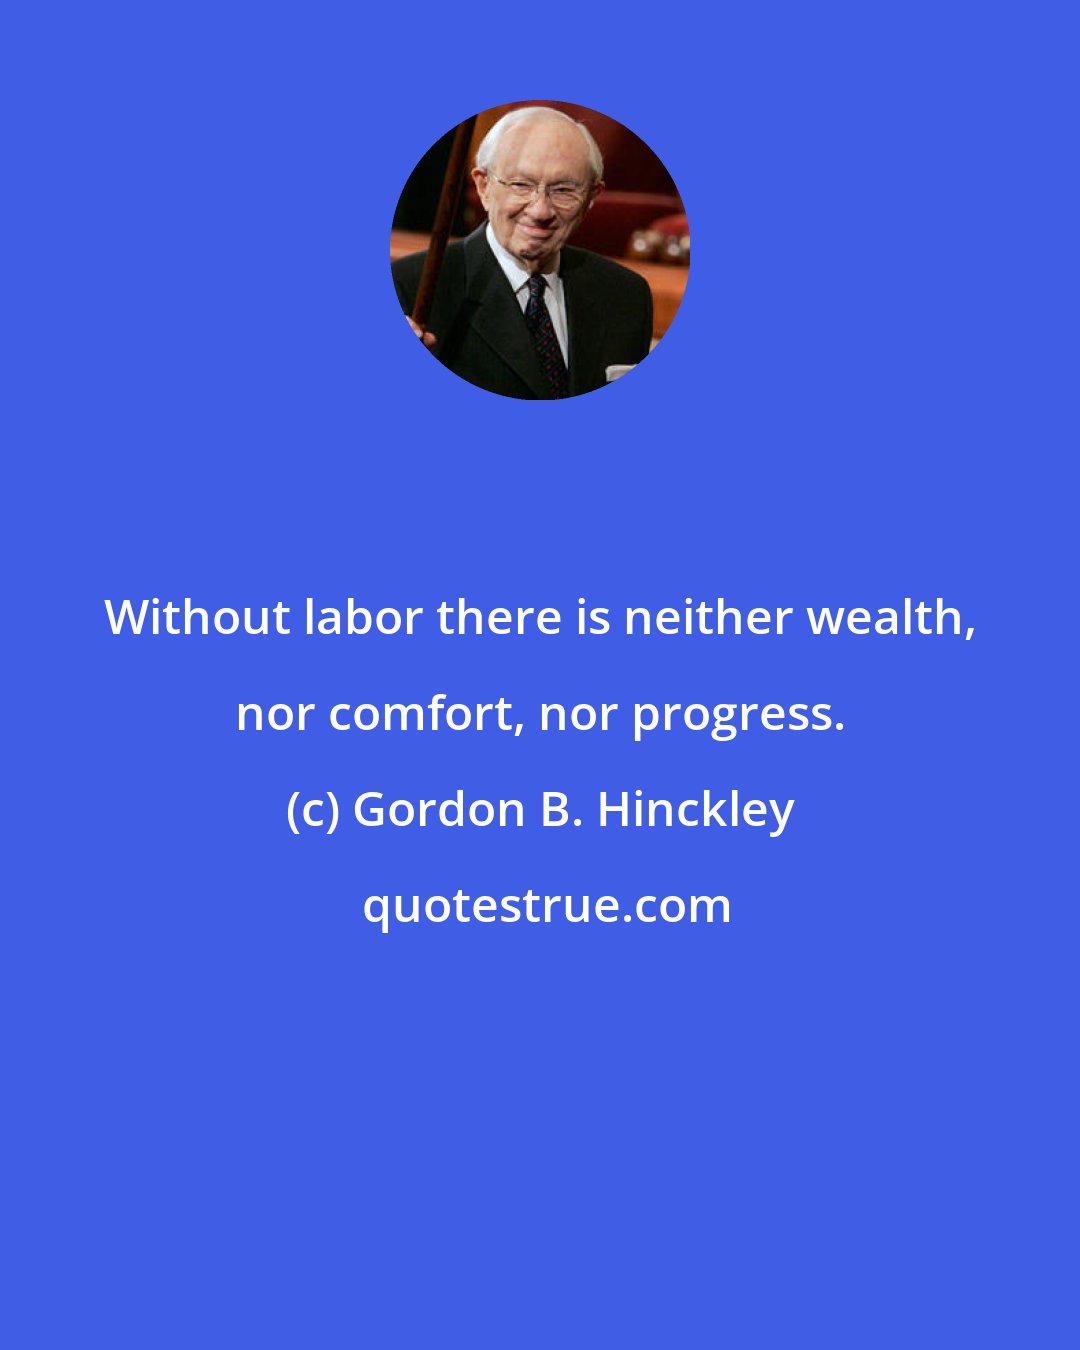 Gordon B. Hinckley: Without labor there is neither wealth, nor comfort, nor progress.